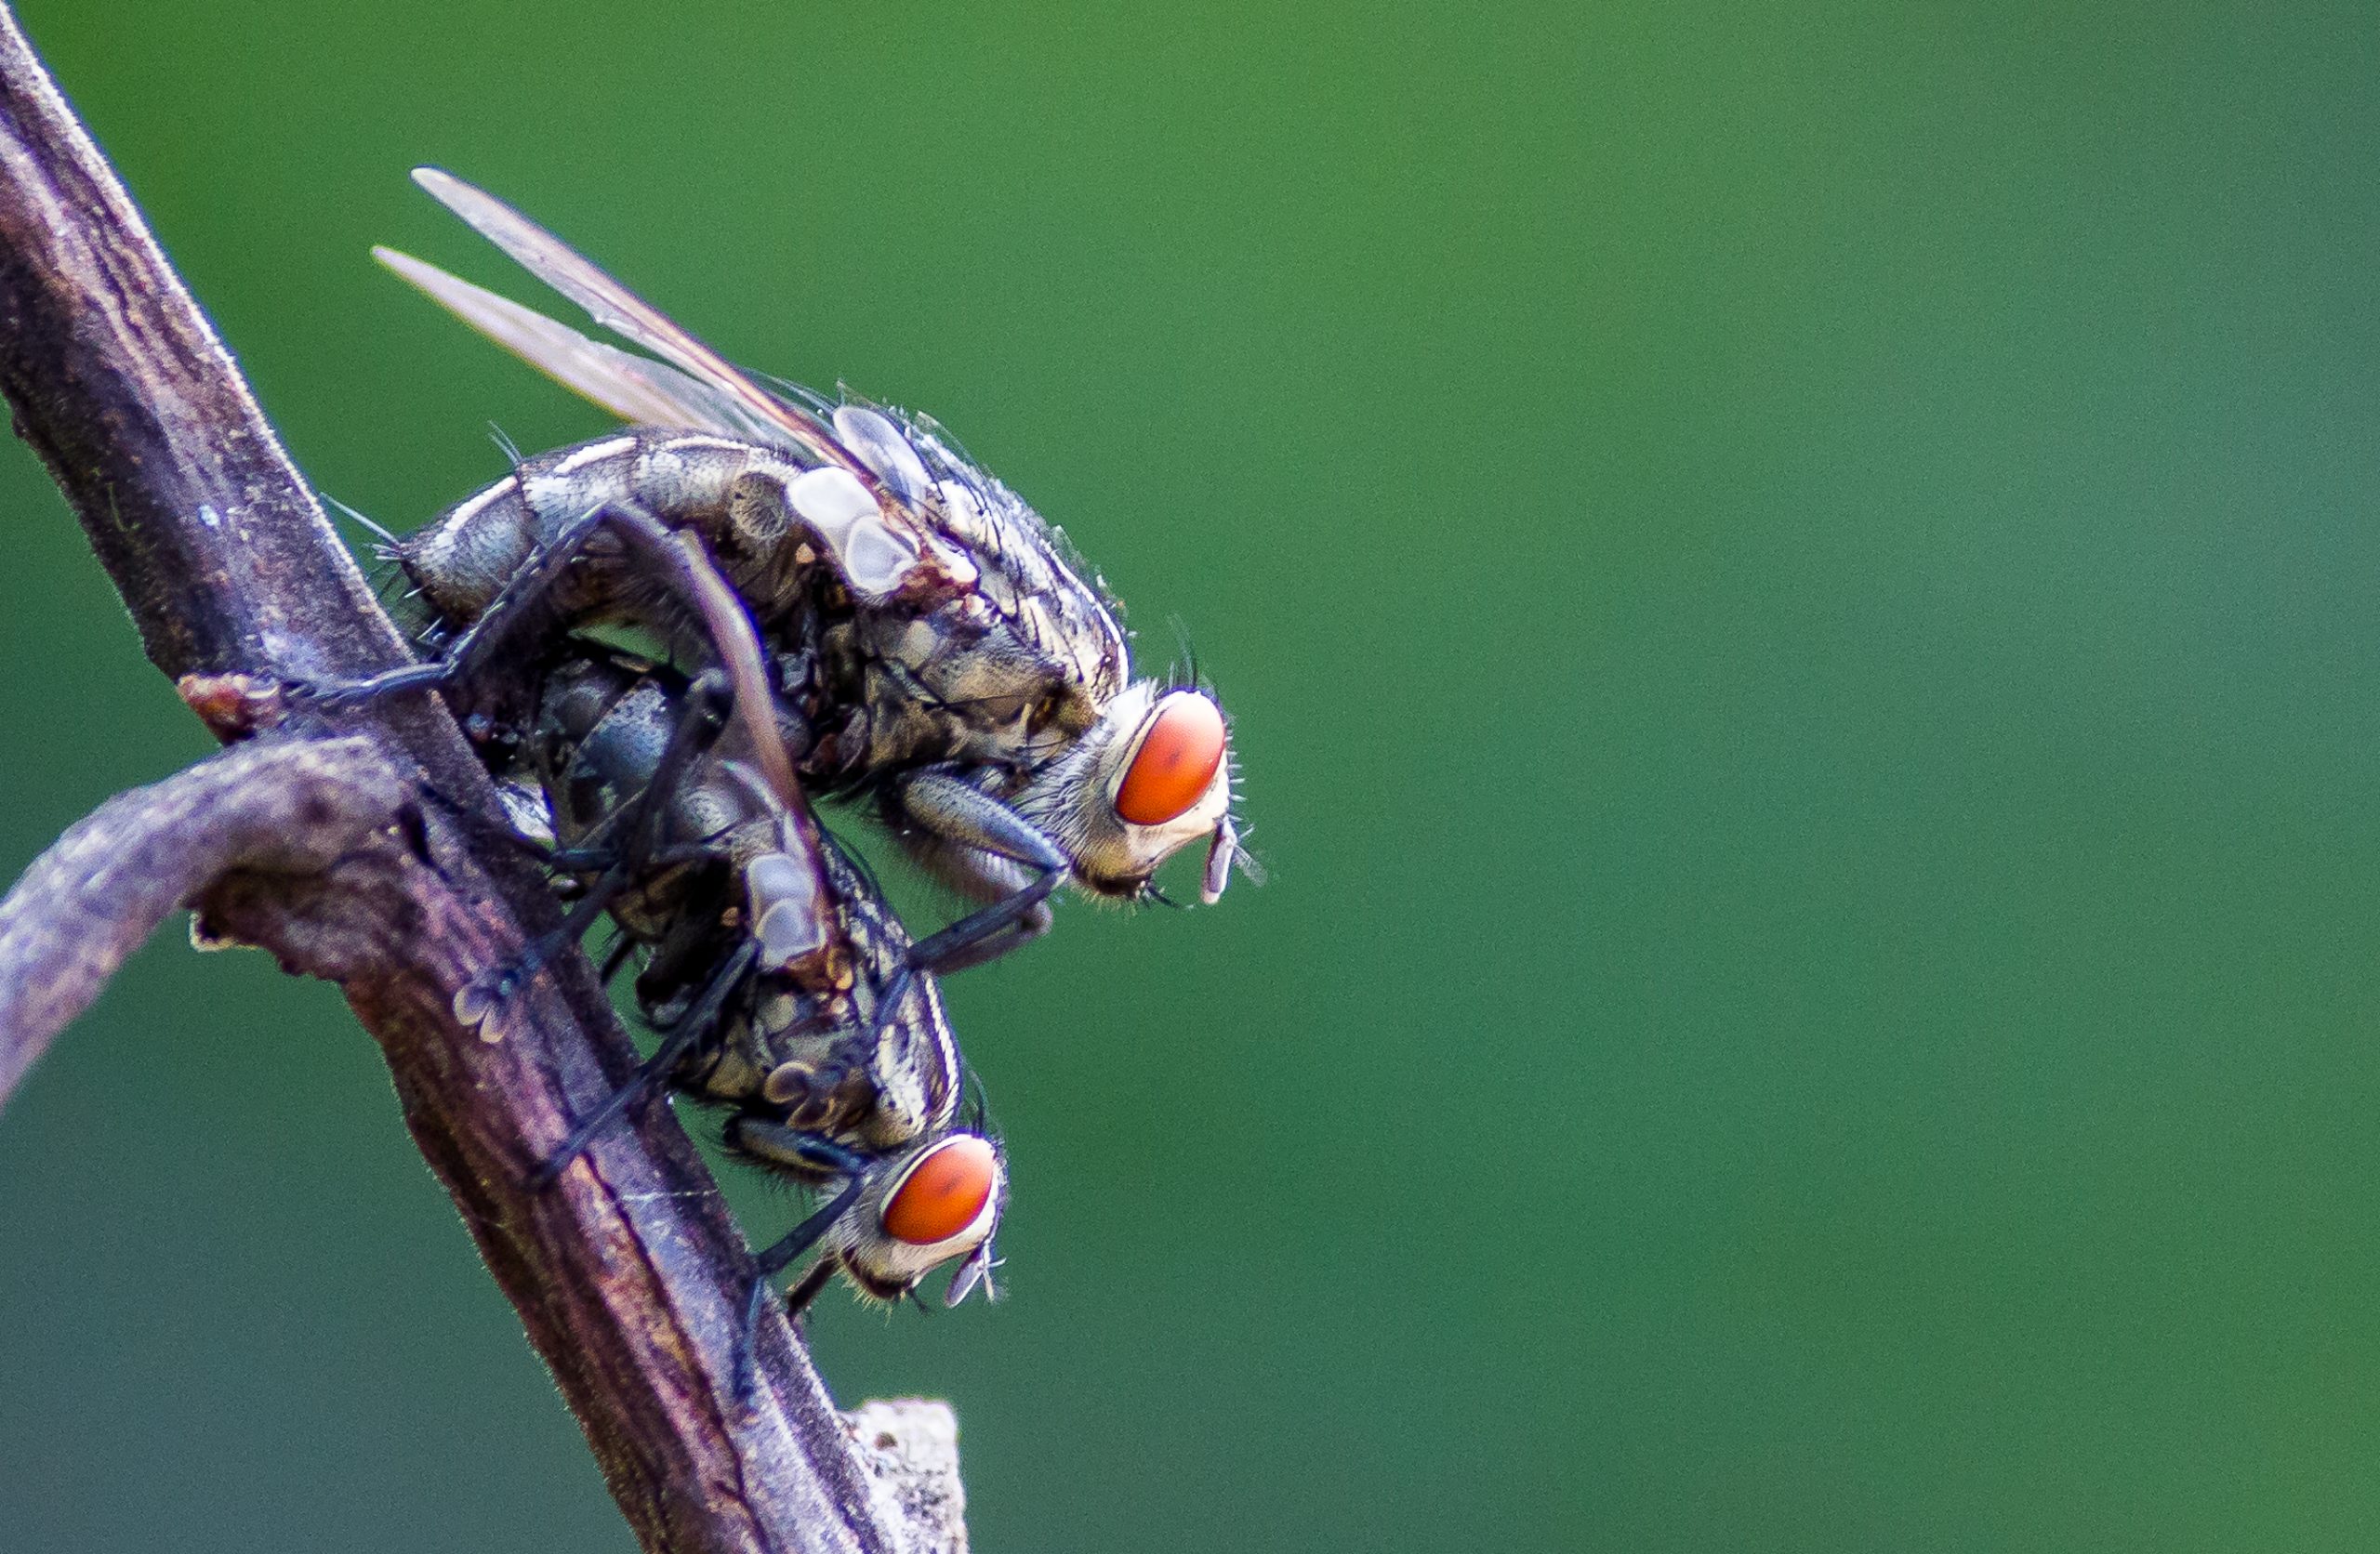 House flies Sitting on the Twig